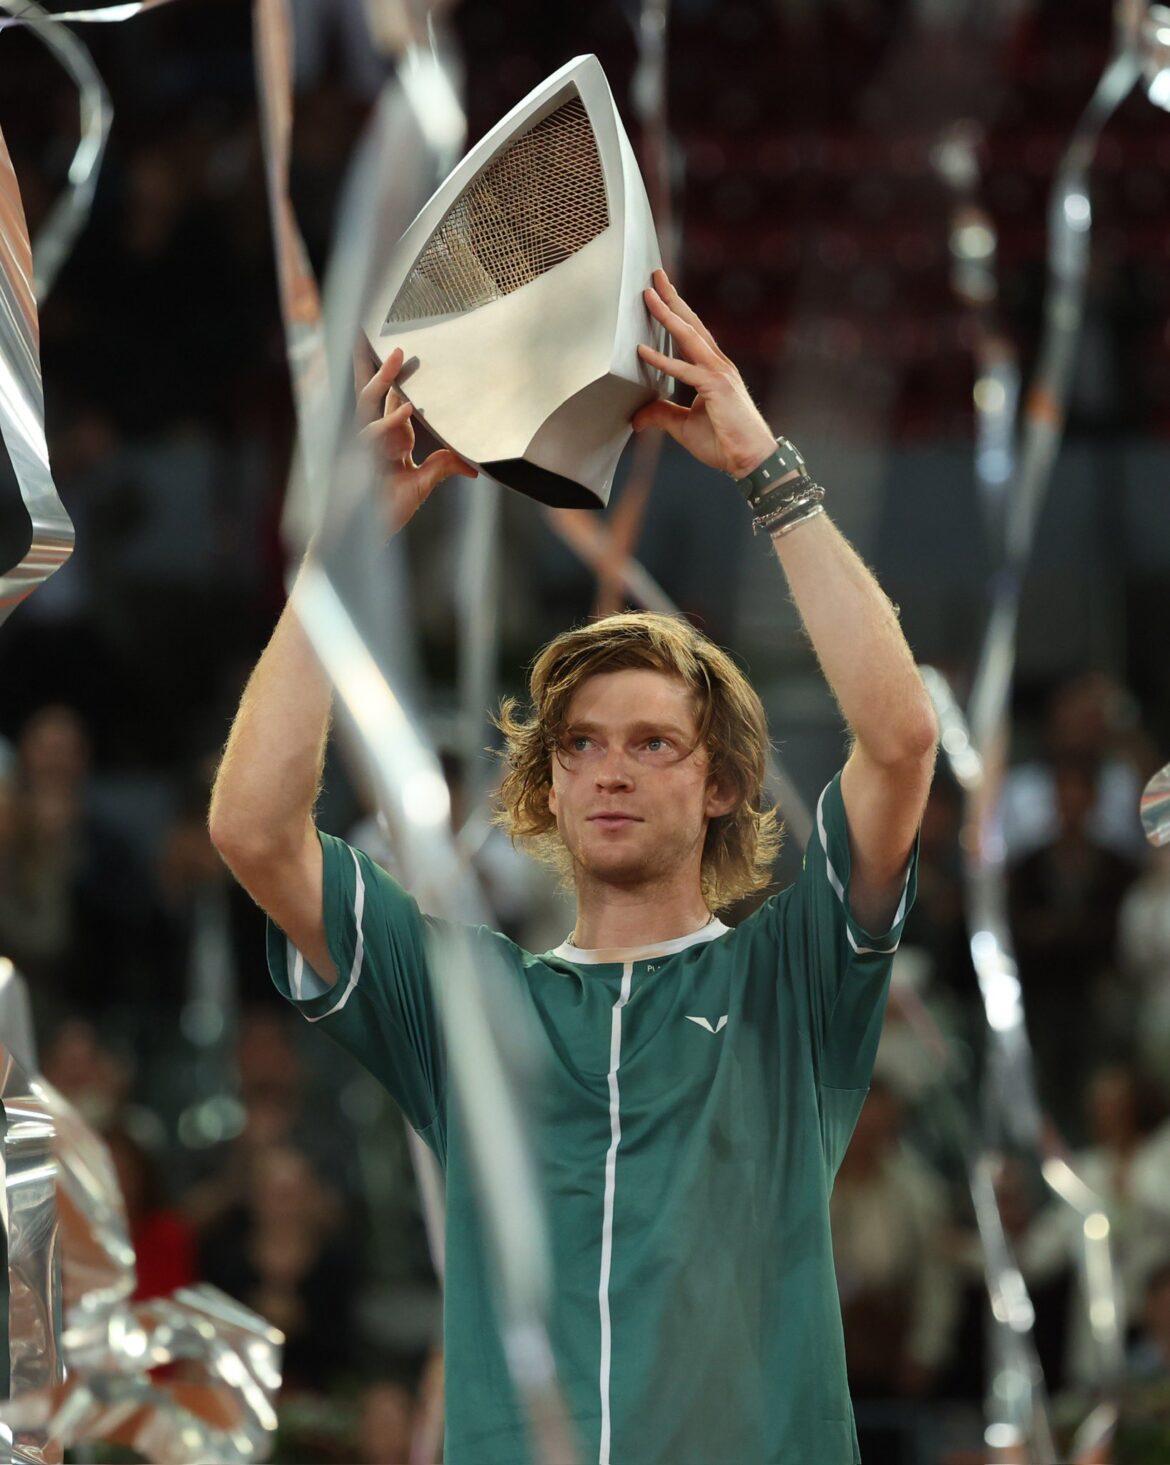 TENNIS: Andrey Rublev came from behind to lift the Madrid title